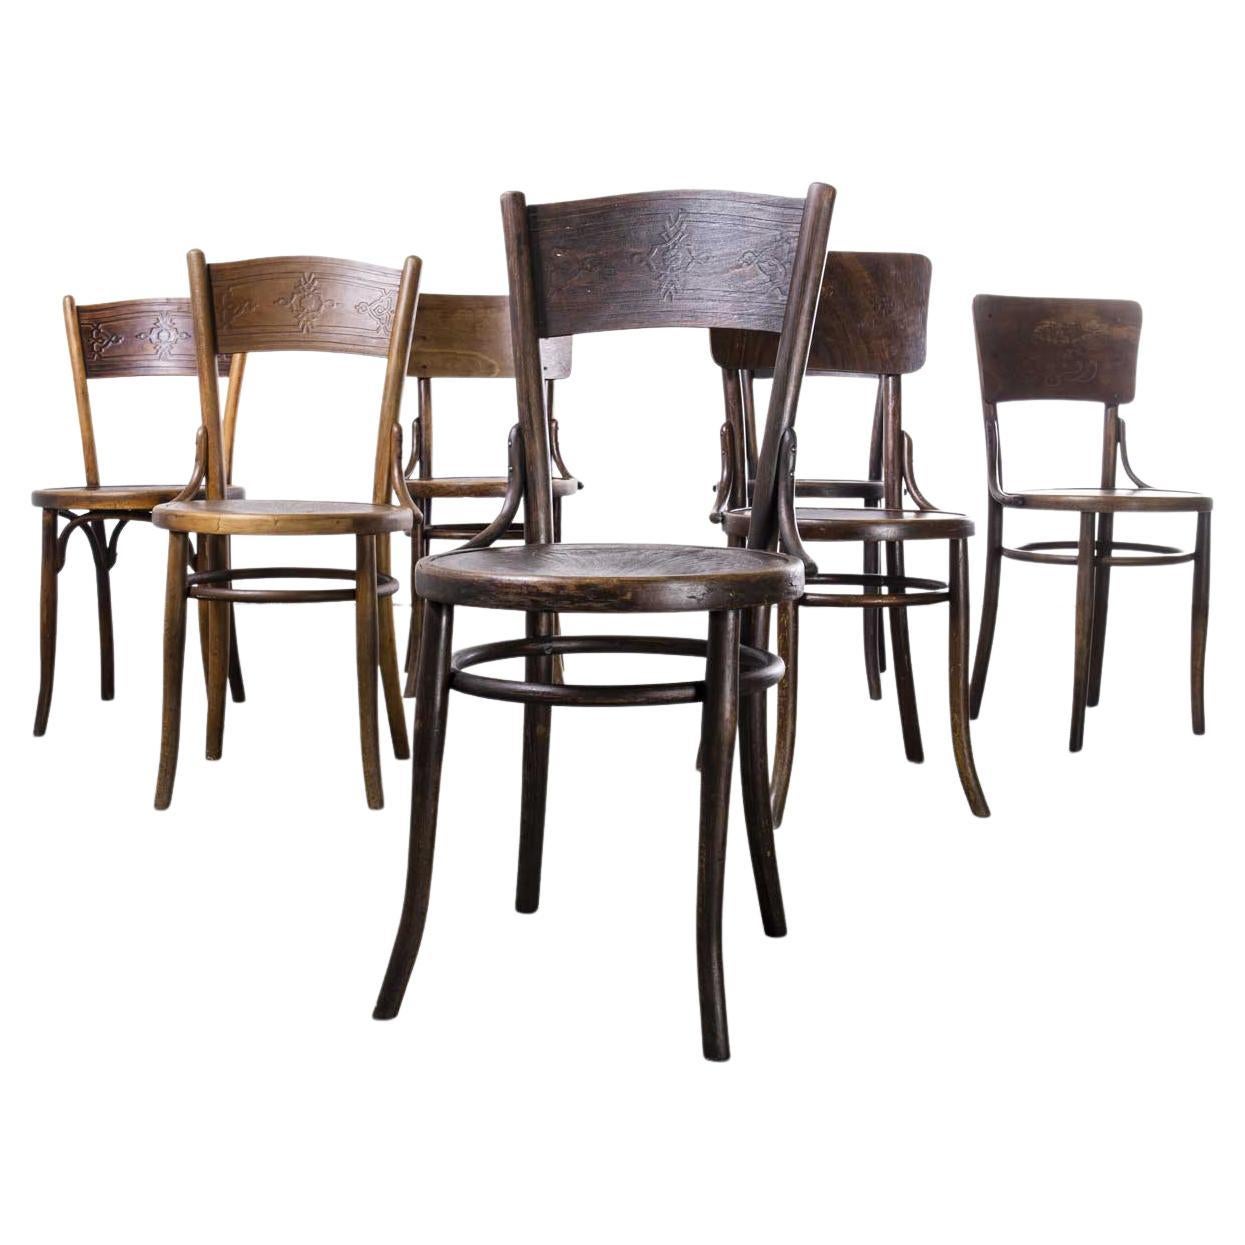 1930's Harlequin Set of Original Bentwood Dining Chairs, Set of Seven